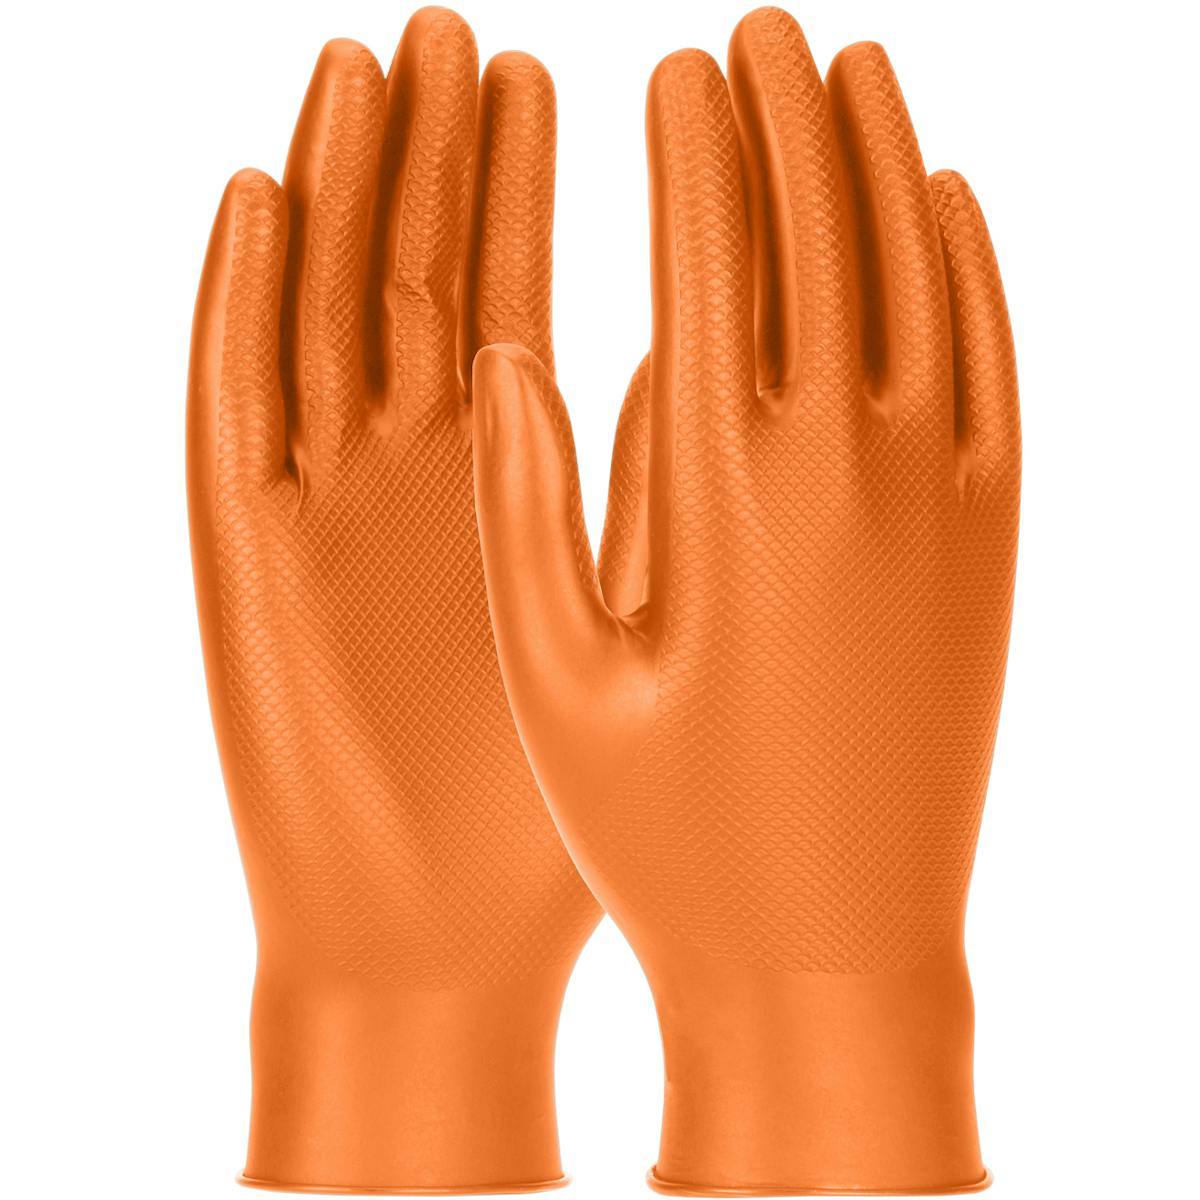 Grippaz™ Skins Extended Use Ambidextrous Nitrile Glove with Textured Fish Scale Grip - 6 Mil (67-256)_0